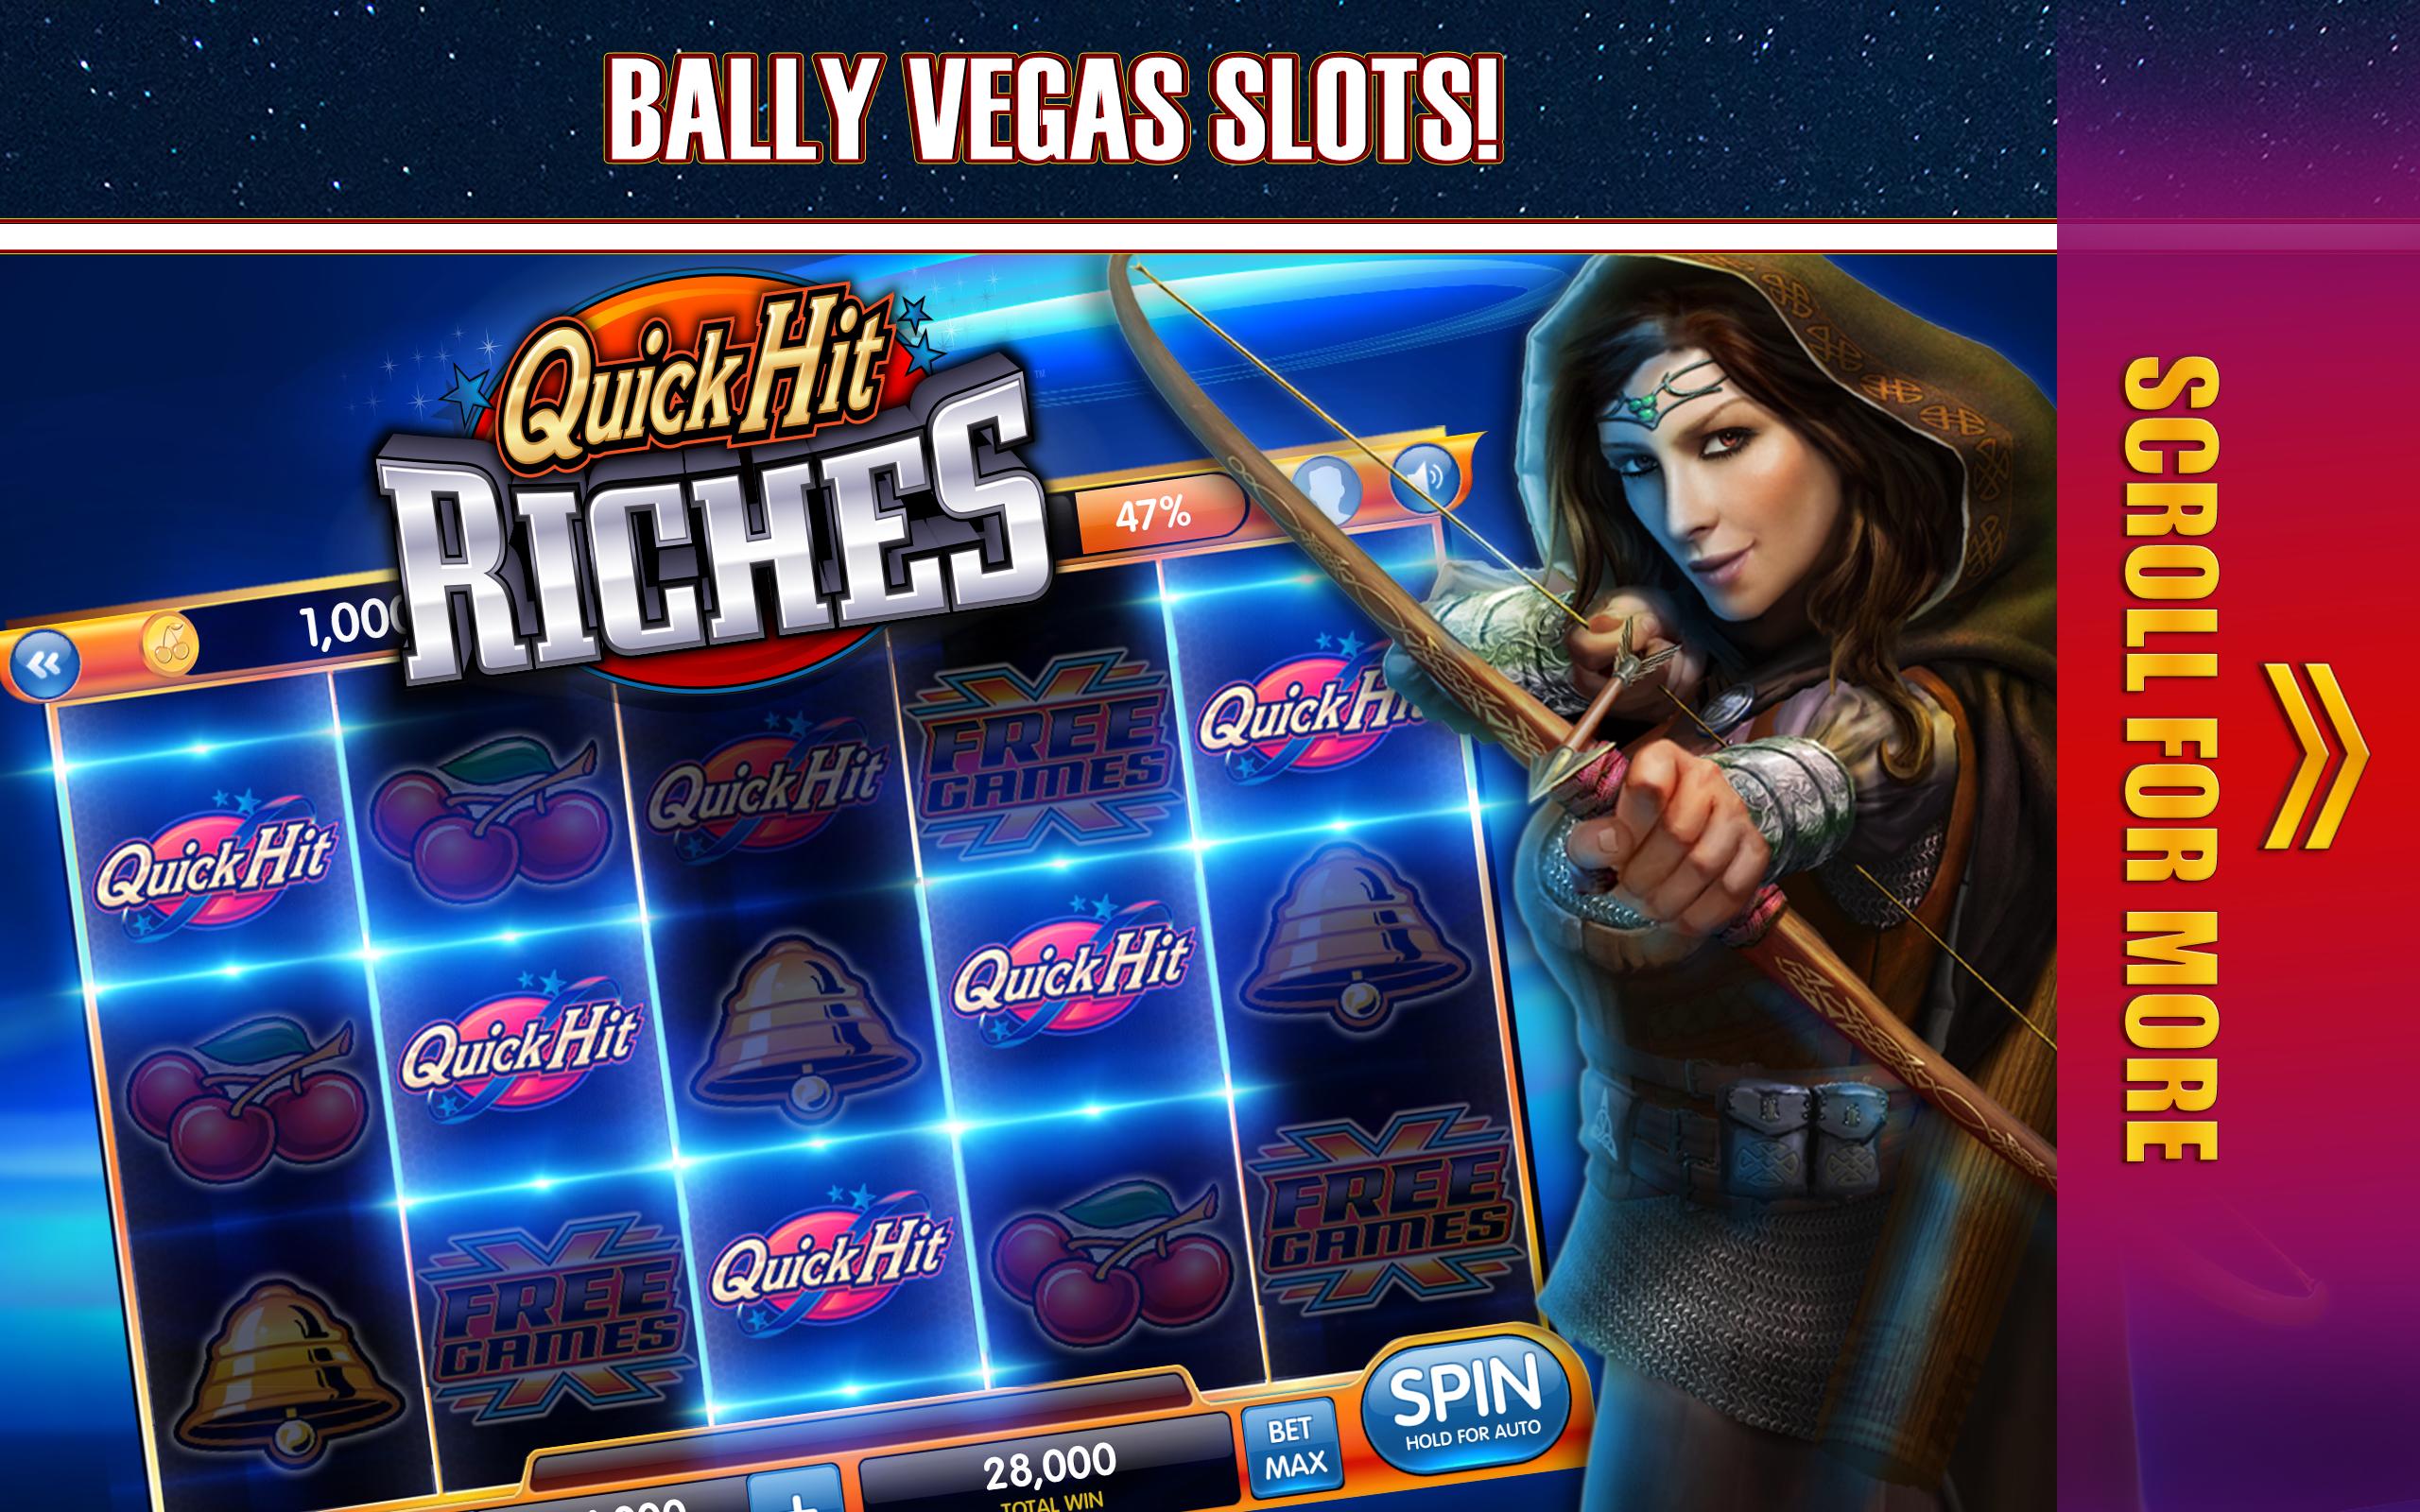 Quick Hit Casino Games Free Casino Slots Games For Android Apk